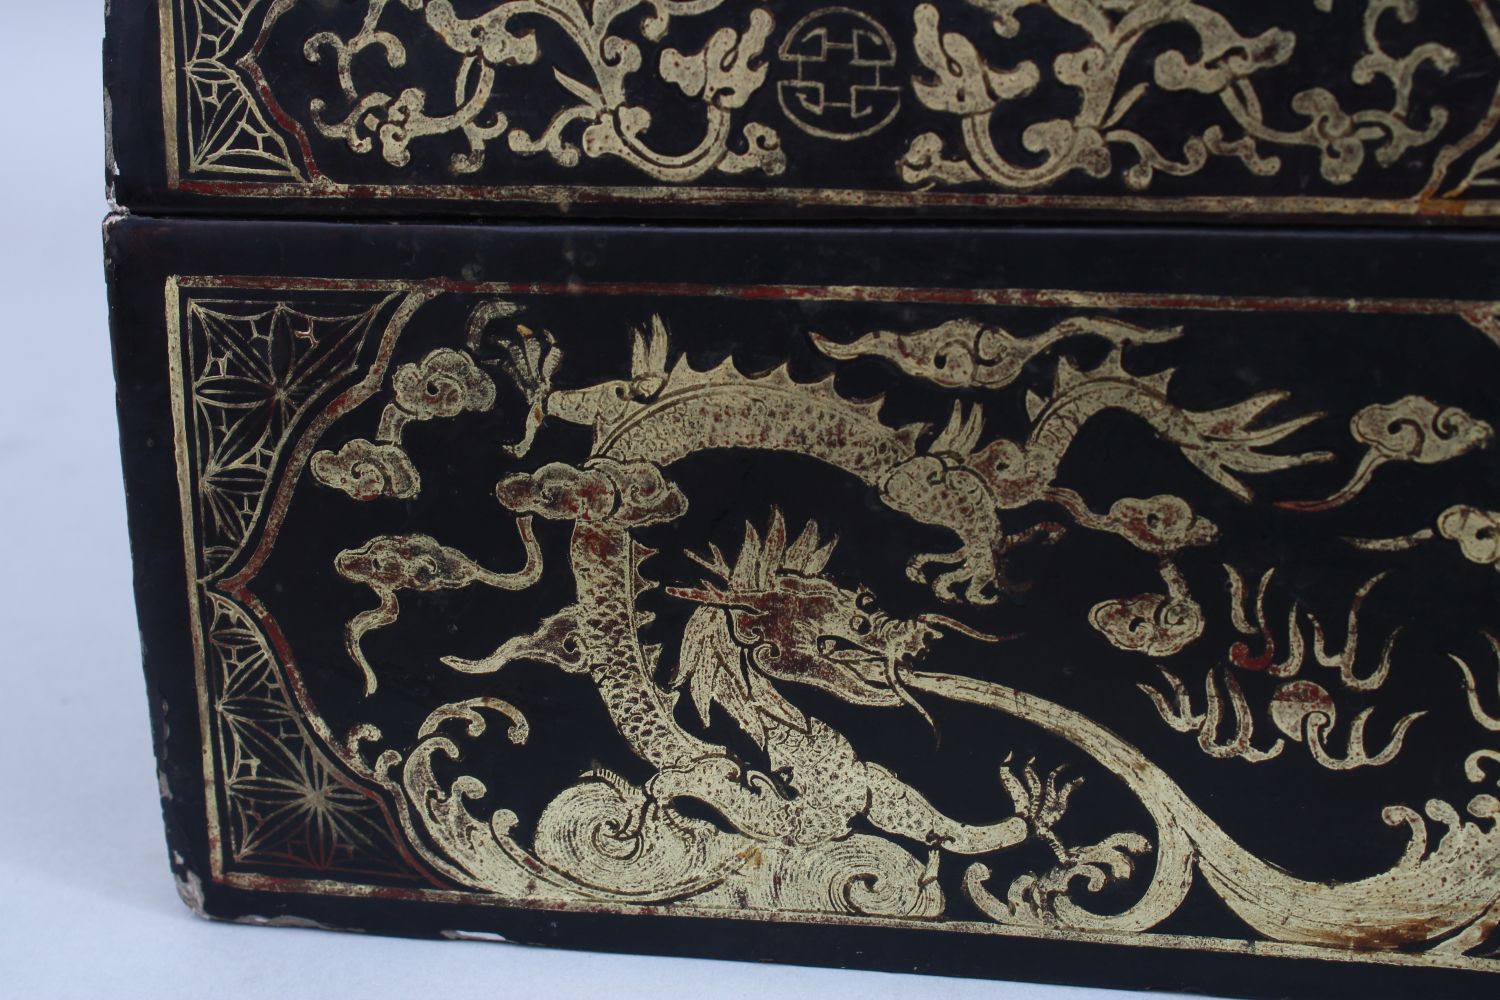 A GOOD 19TH CENTURY CHINESE LACQUER CHEST / BOX, the lacquer box with gilded decoration of dragons - Image 5 of 12